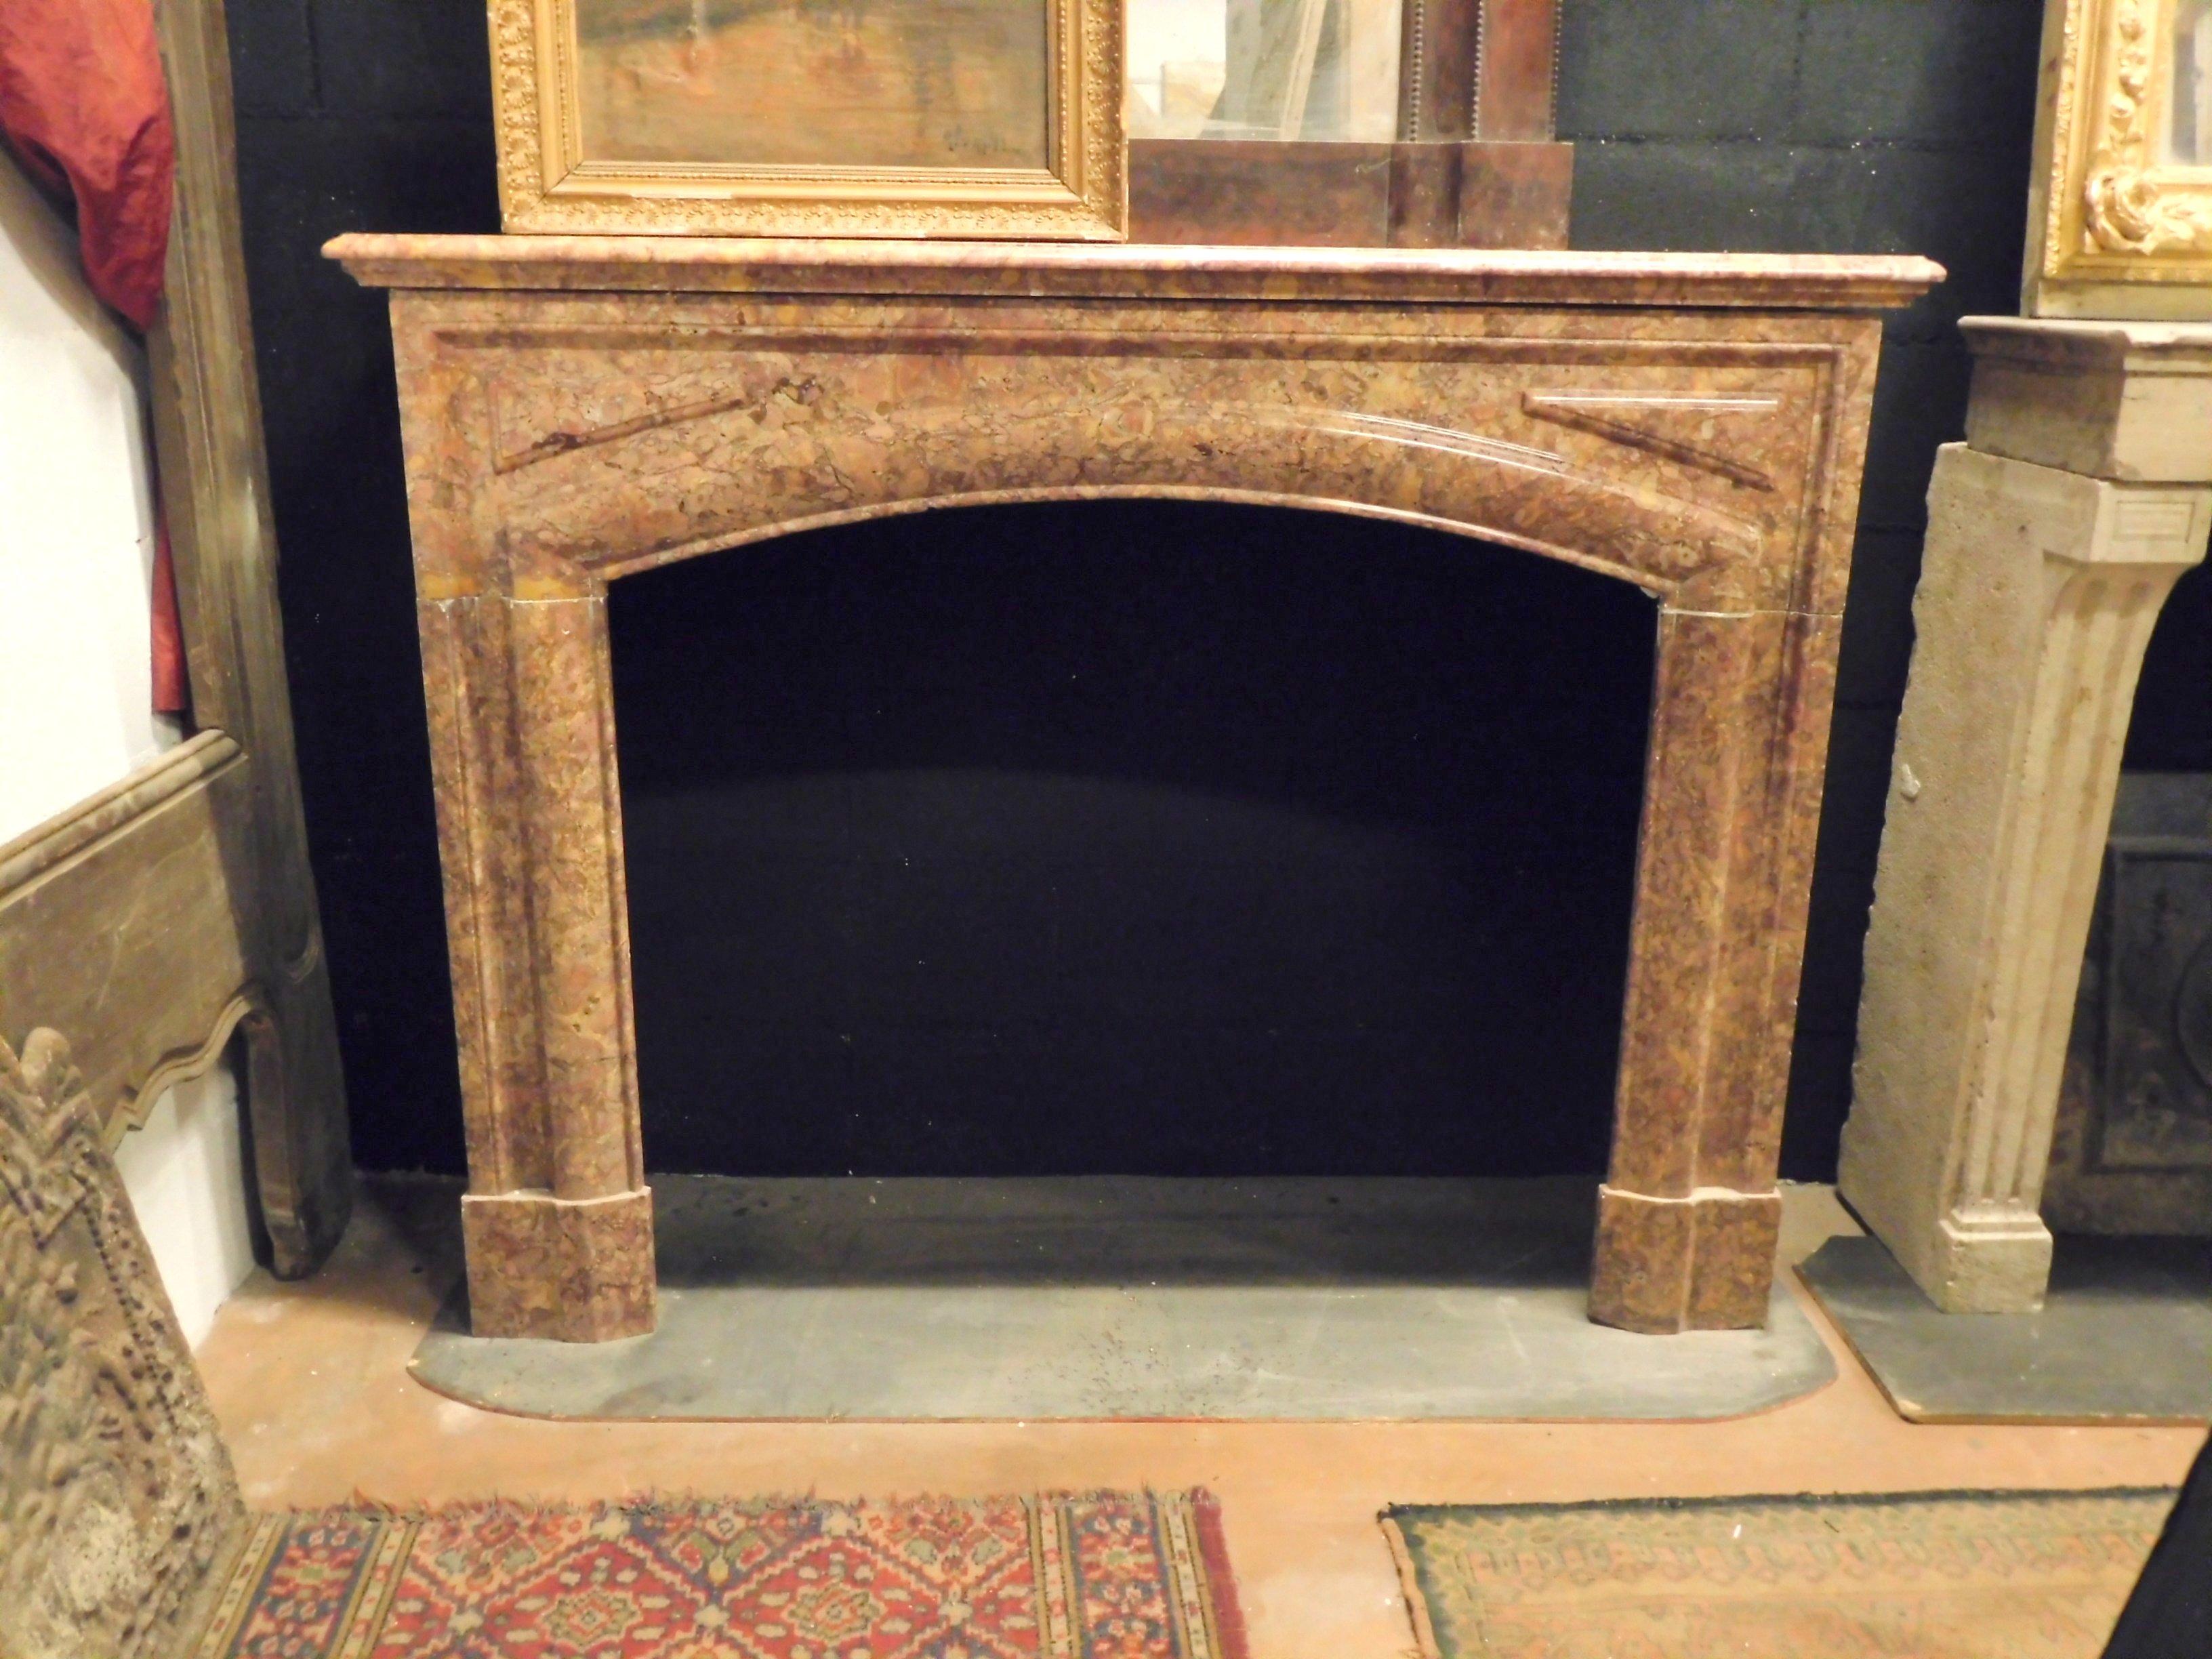 2 Antique Identical Fireplaces, Red Marble with Curved Mouth, Late 1800, Italy For Sale 1